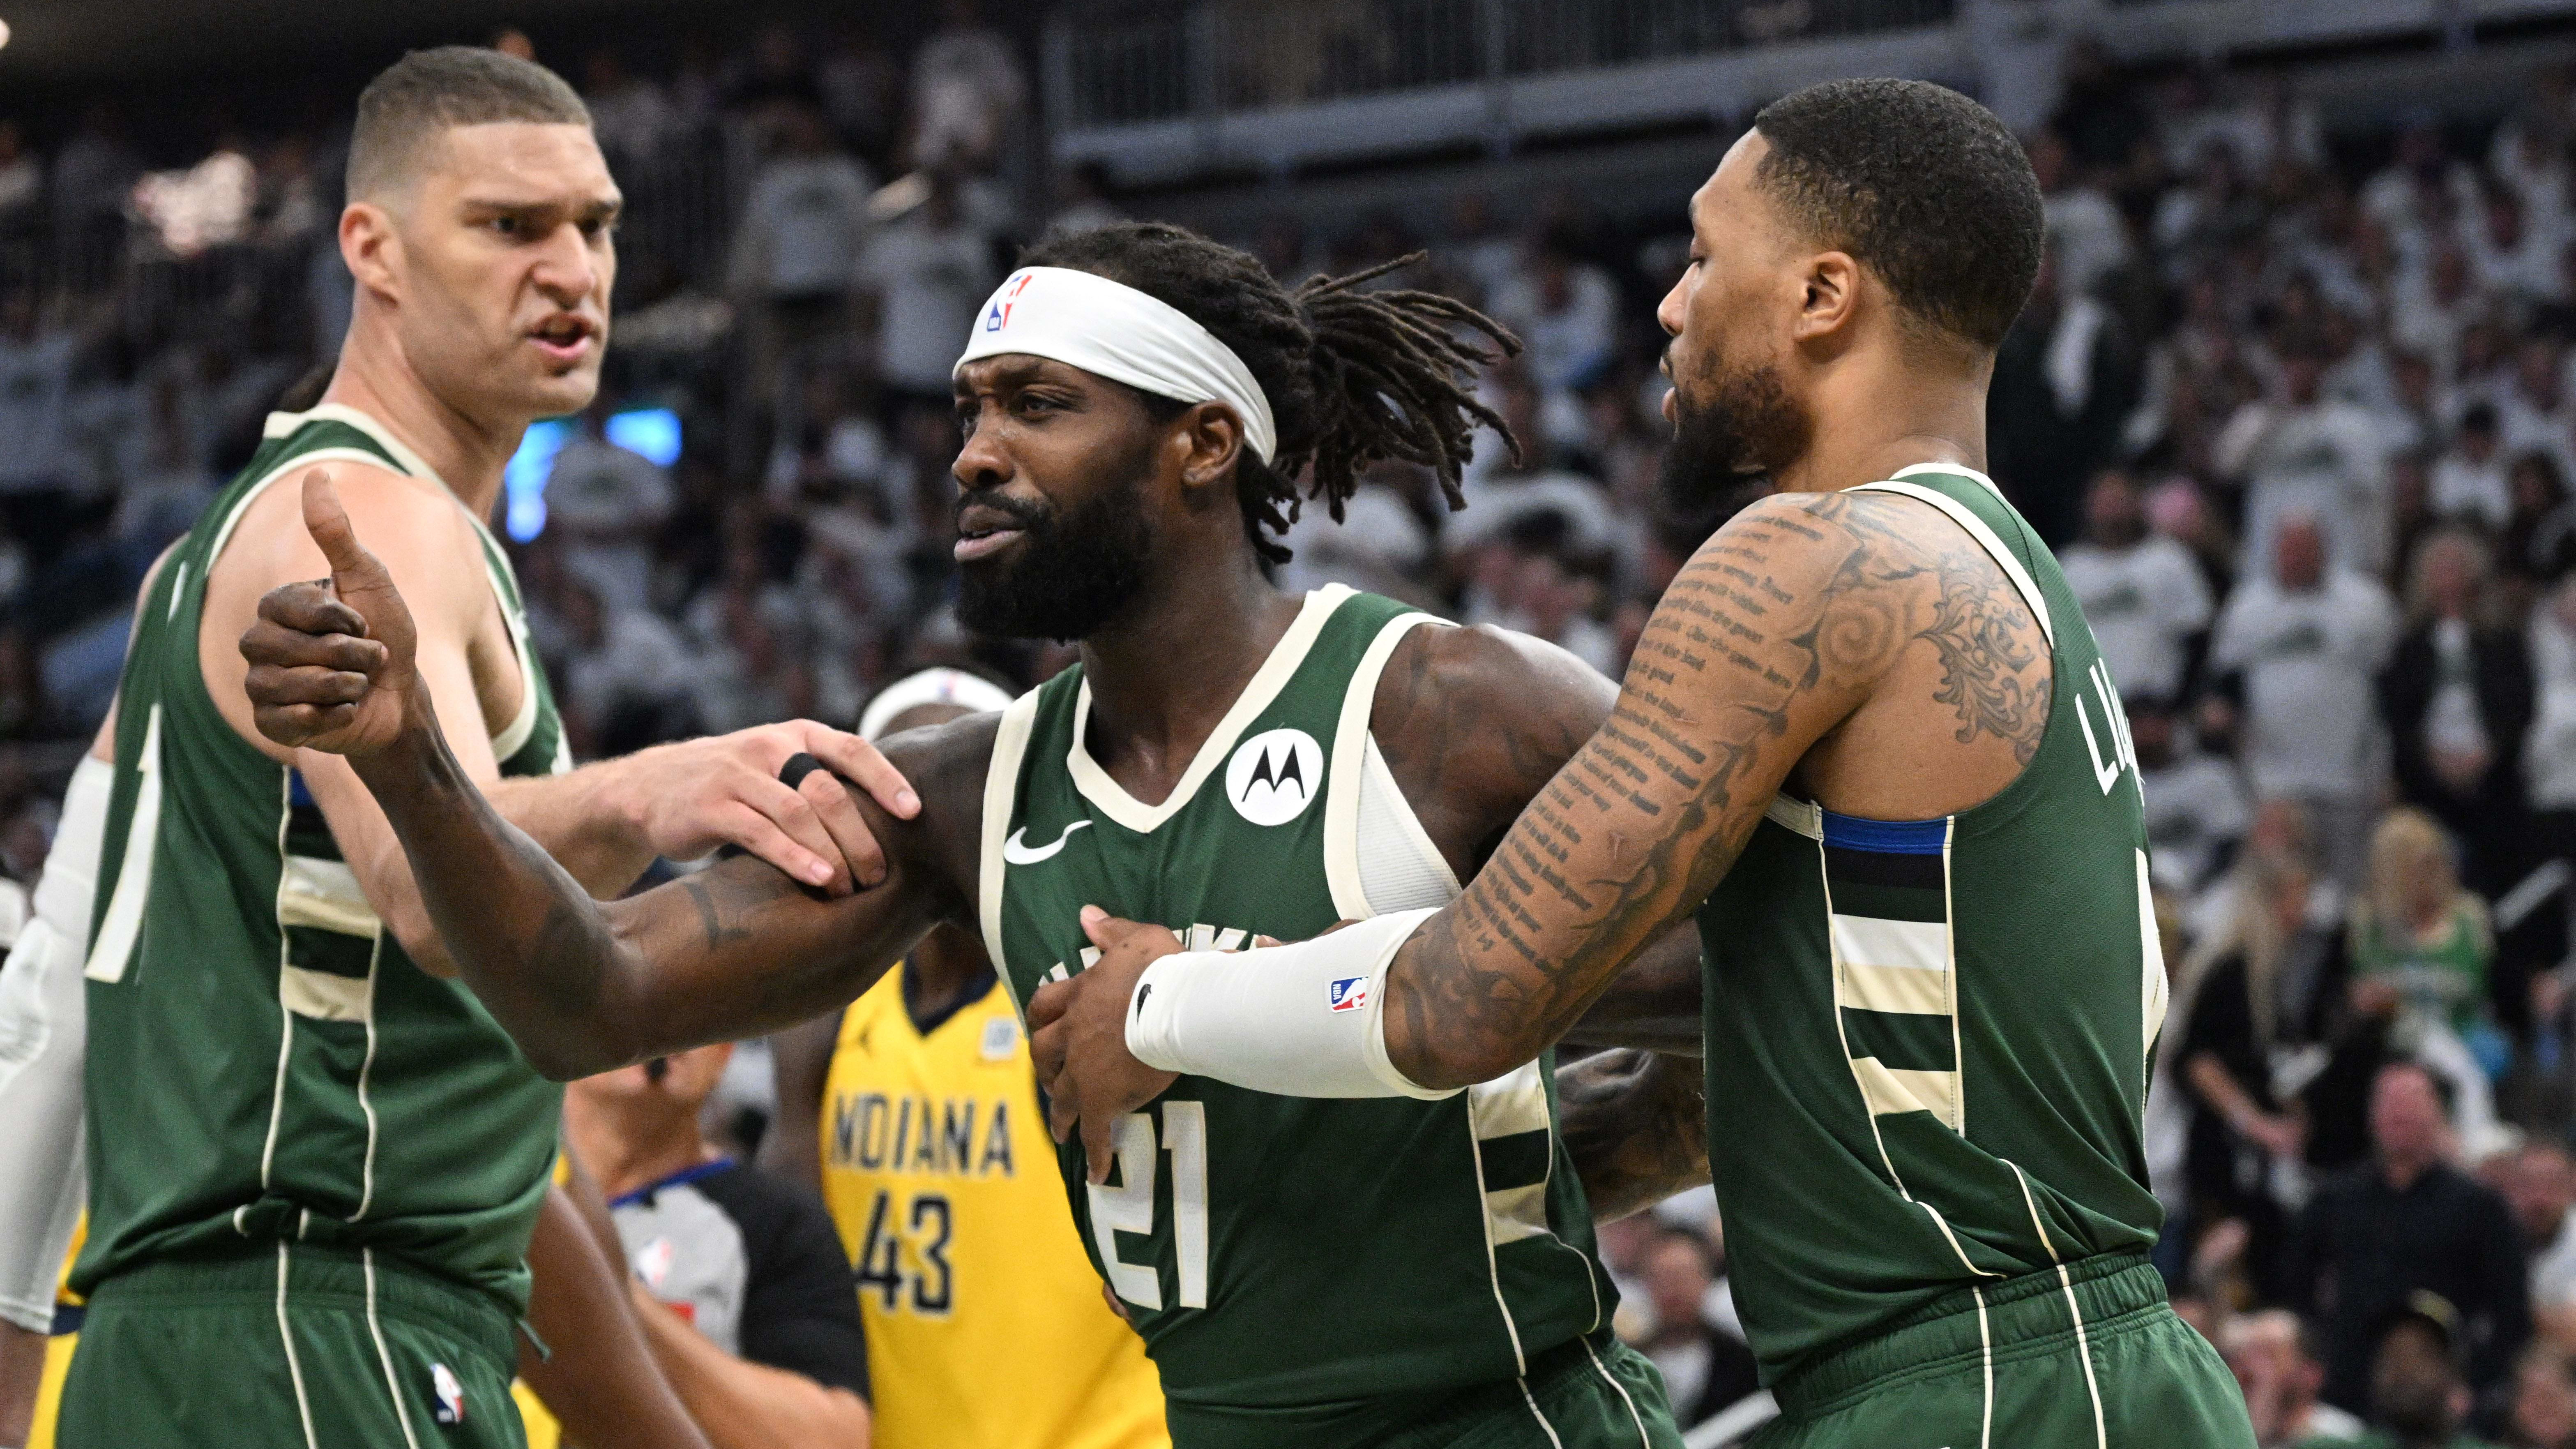 Patrick Beverley Explains What Happened During Altercation With Fan in Bucks–Pacers